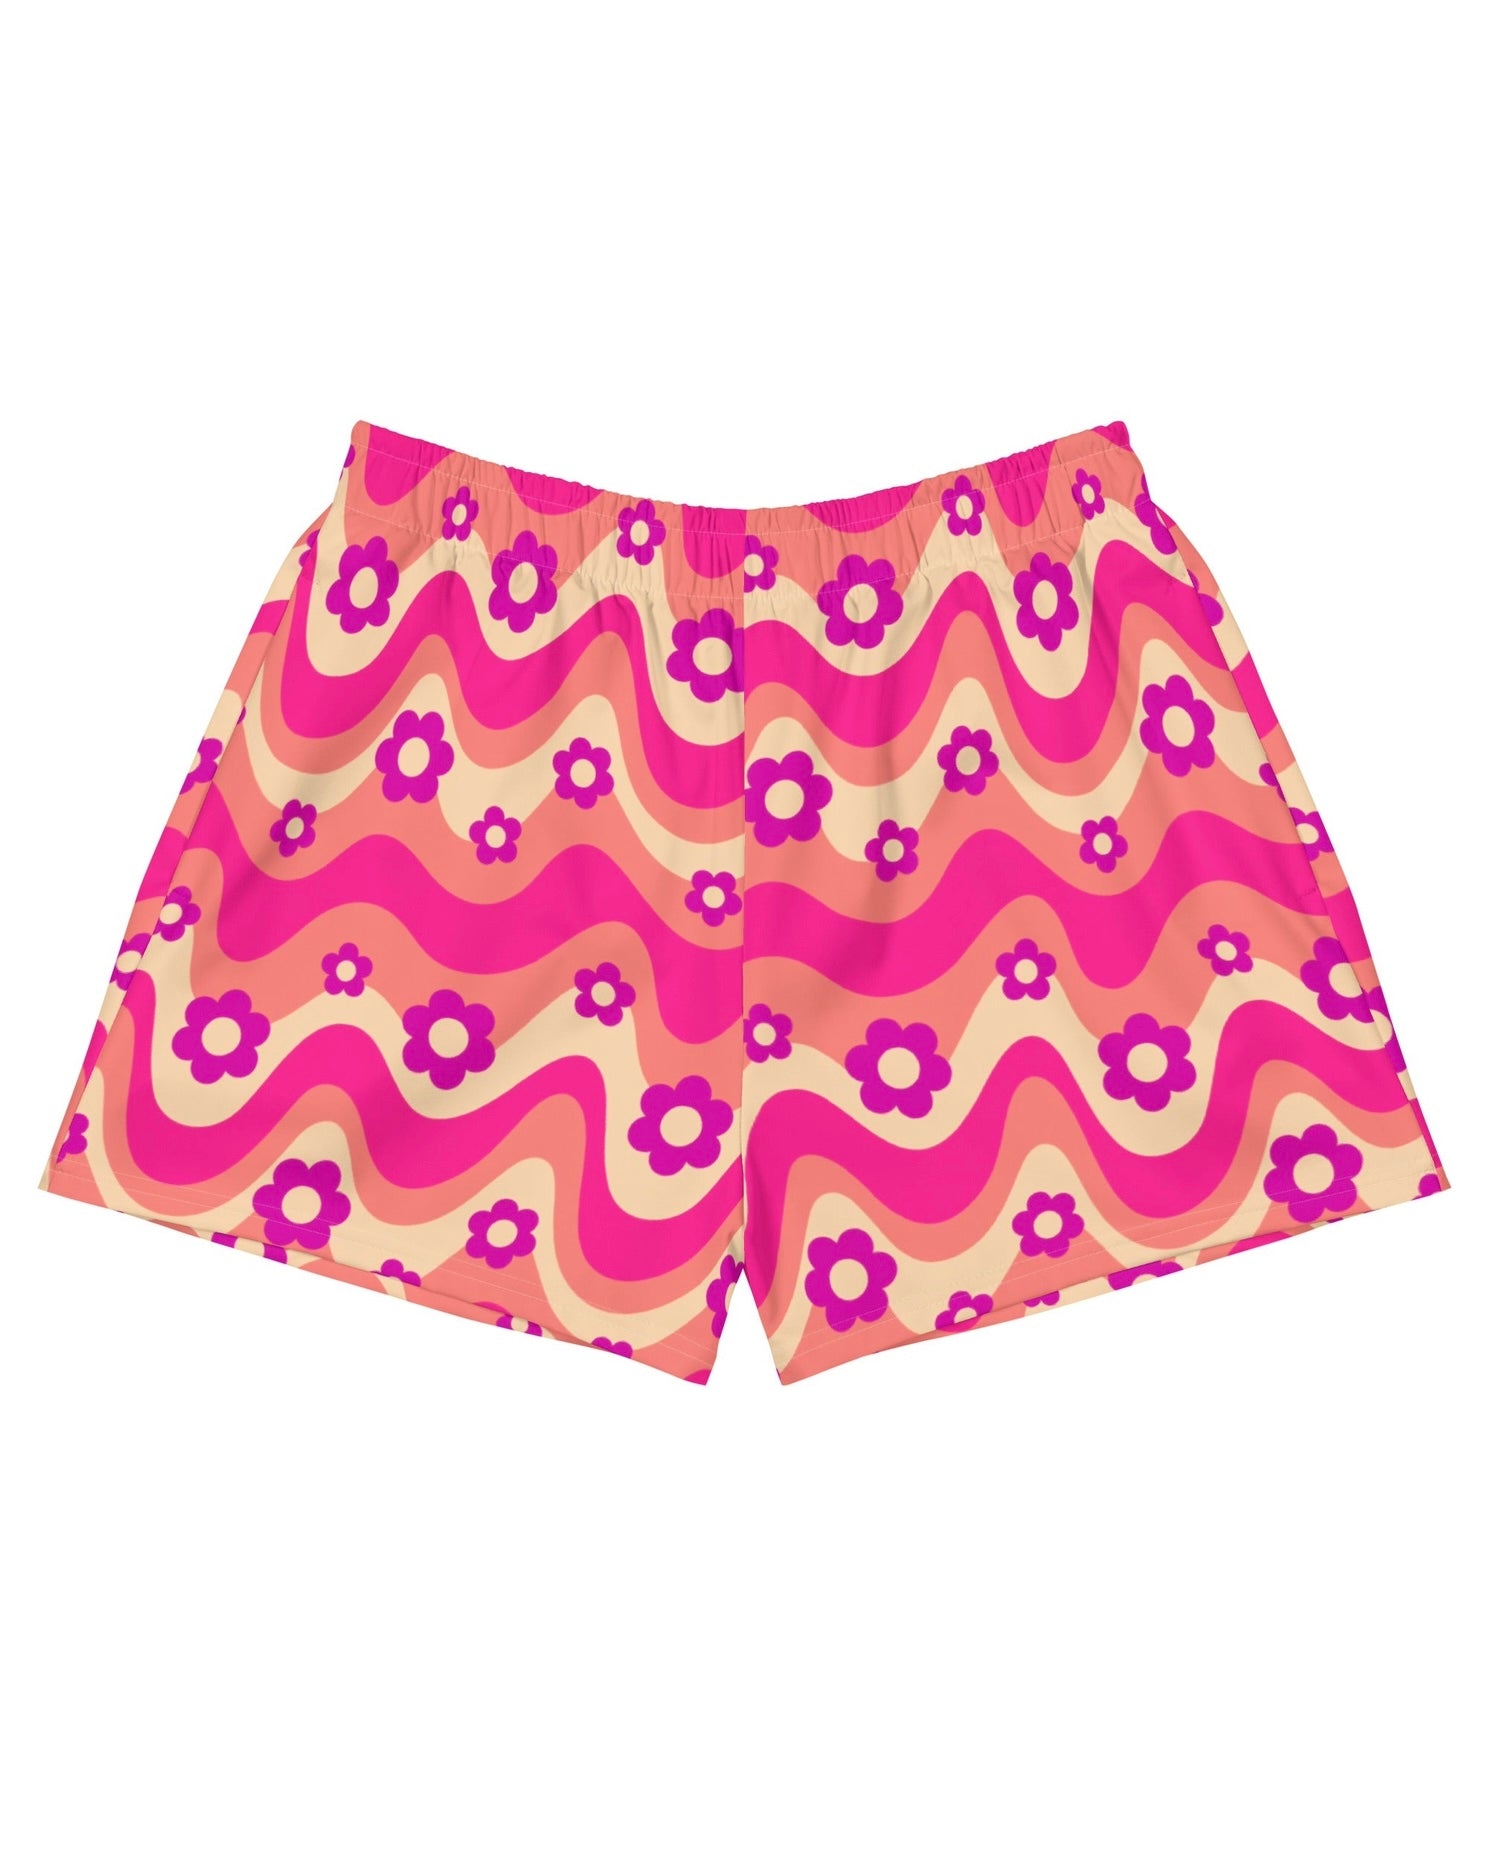 Flower Power Pink Recycled Shorts, Athletic Shorts, - One Stop Rave